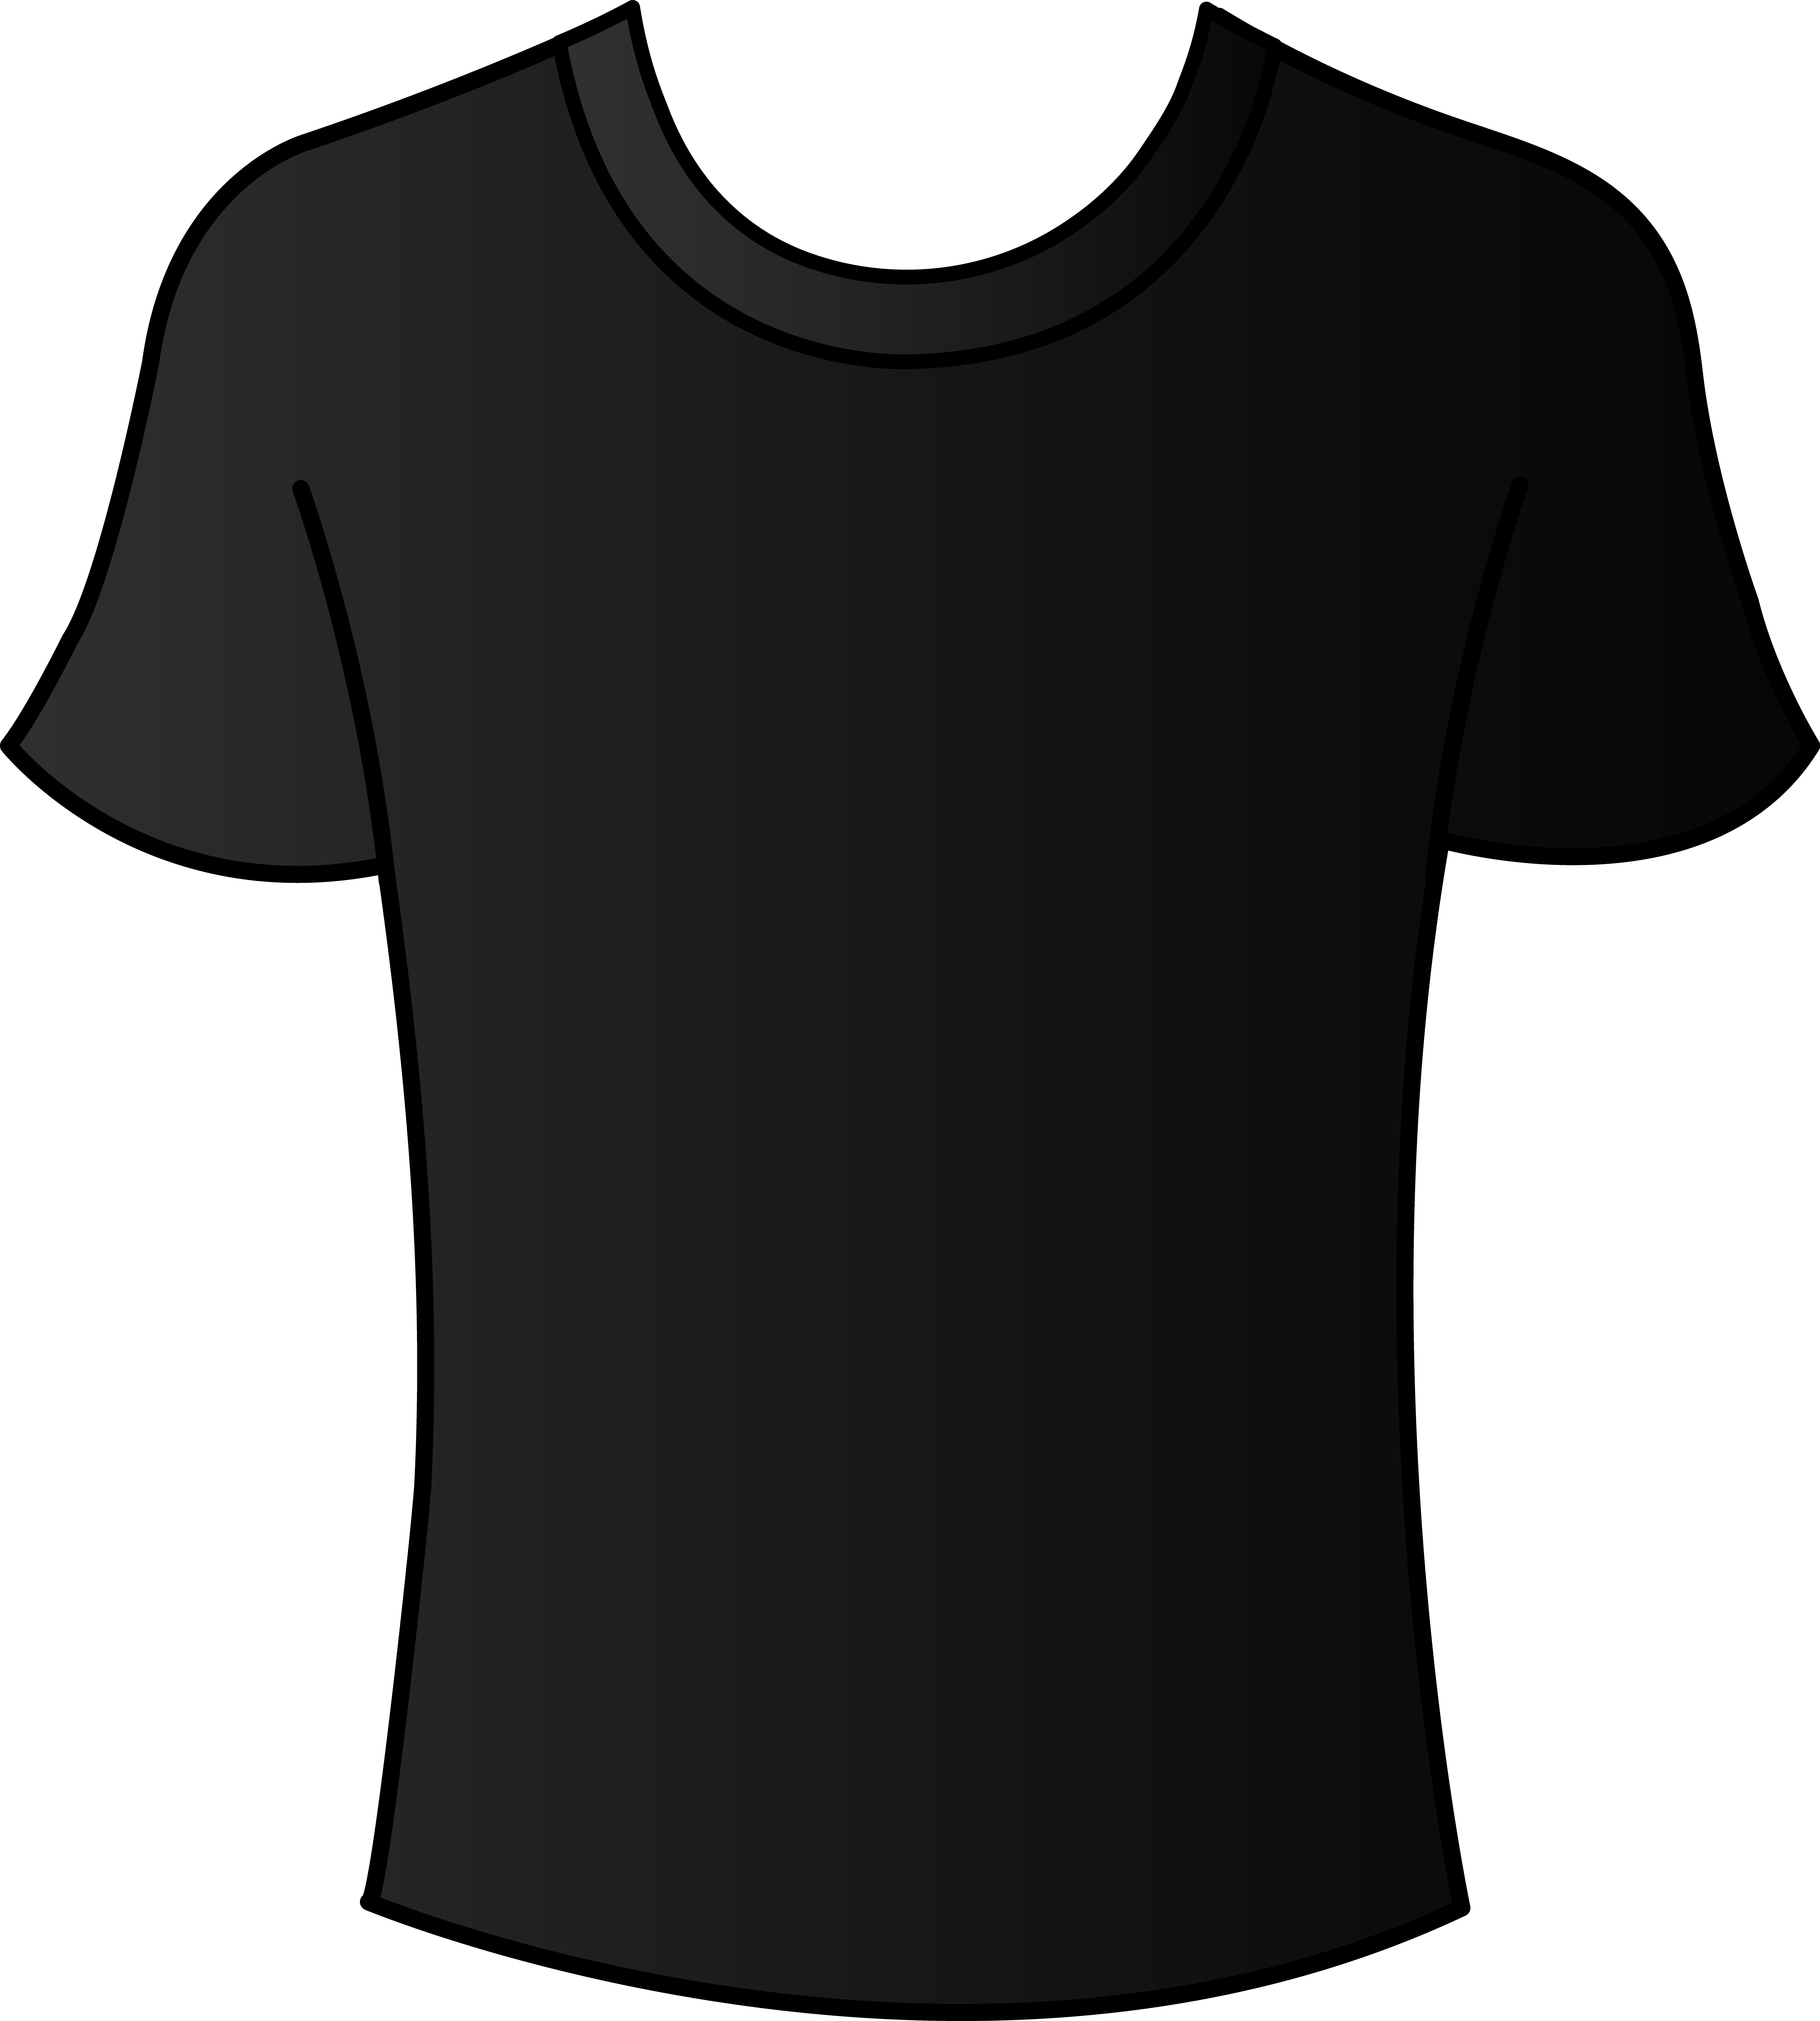 tee-shirt-outline-cliparts-co